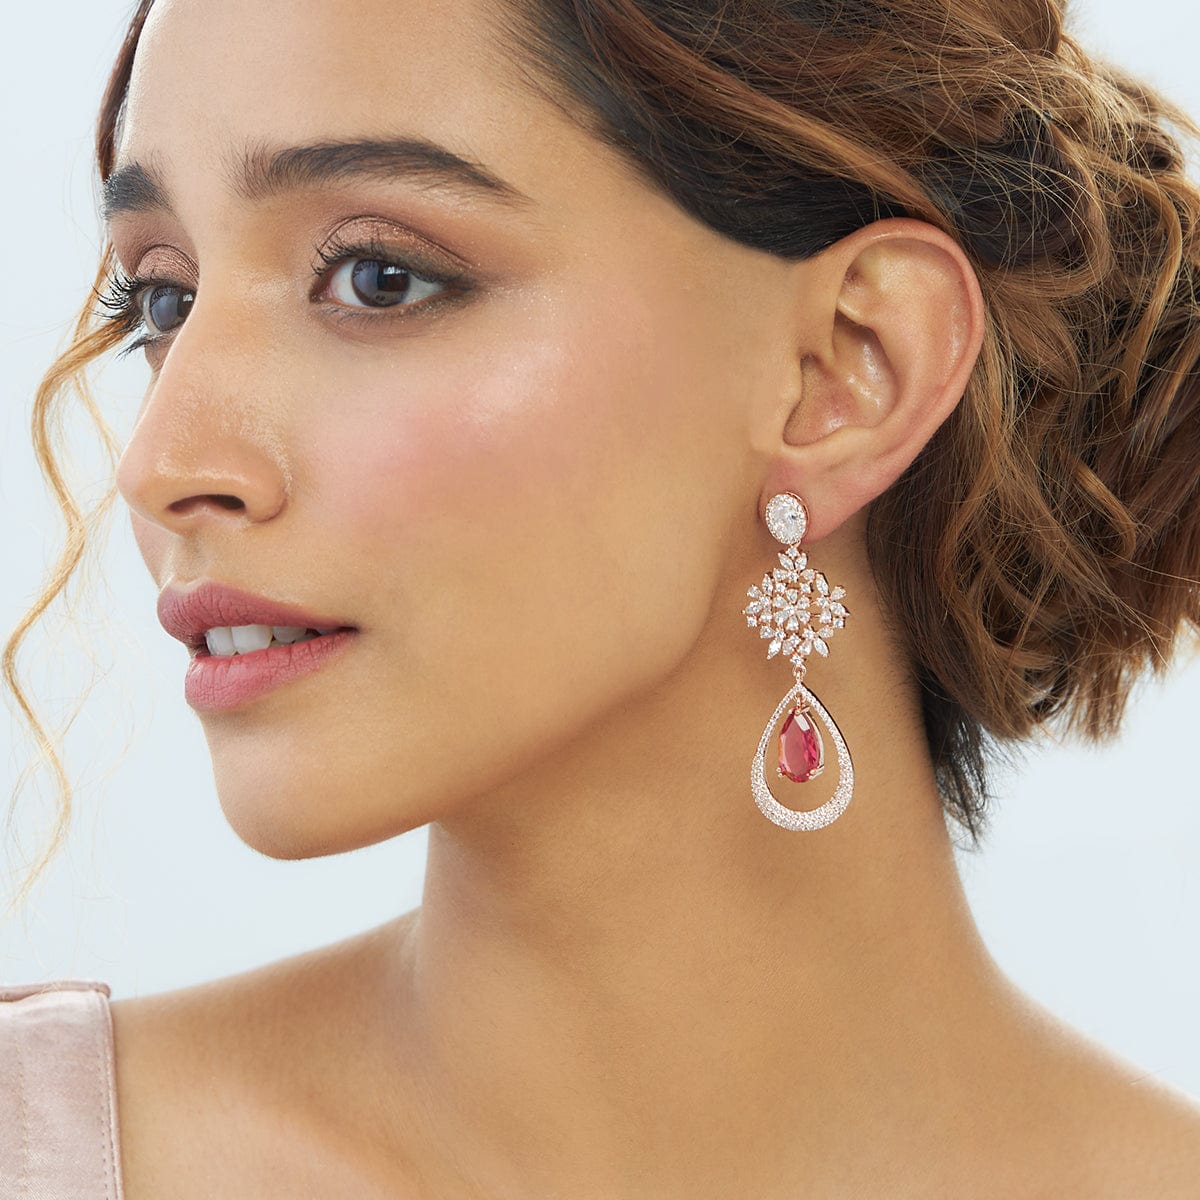 Lab Grown Loose Moissanite Fake Diamond Earrings 100% Real Stone In Blue,  Green, Pink, And Yellow Sizes 05 3CT Perfect For Rings From Yyyonna, $31.36  | DHgate.Com